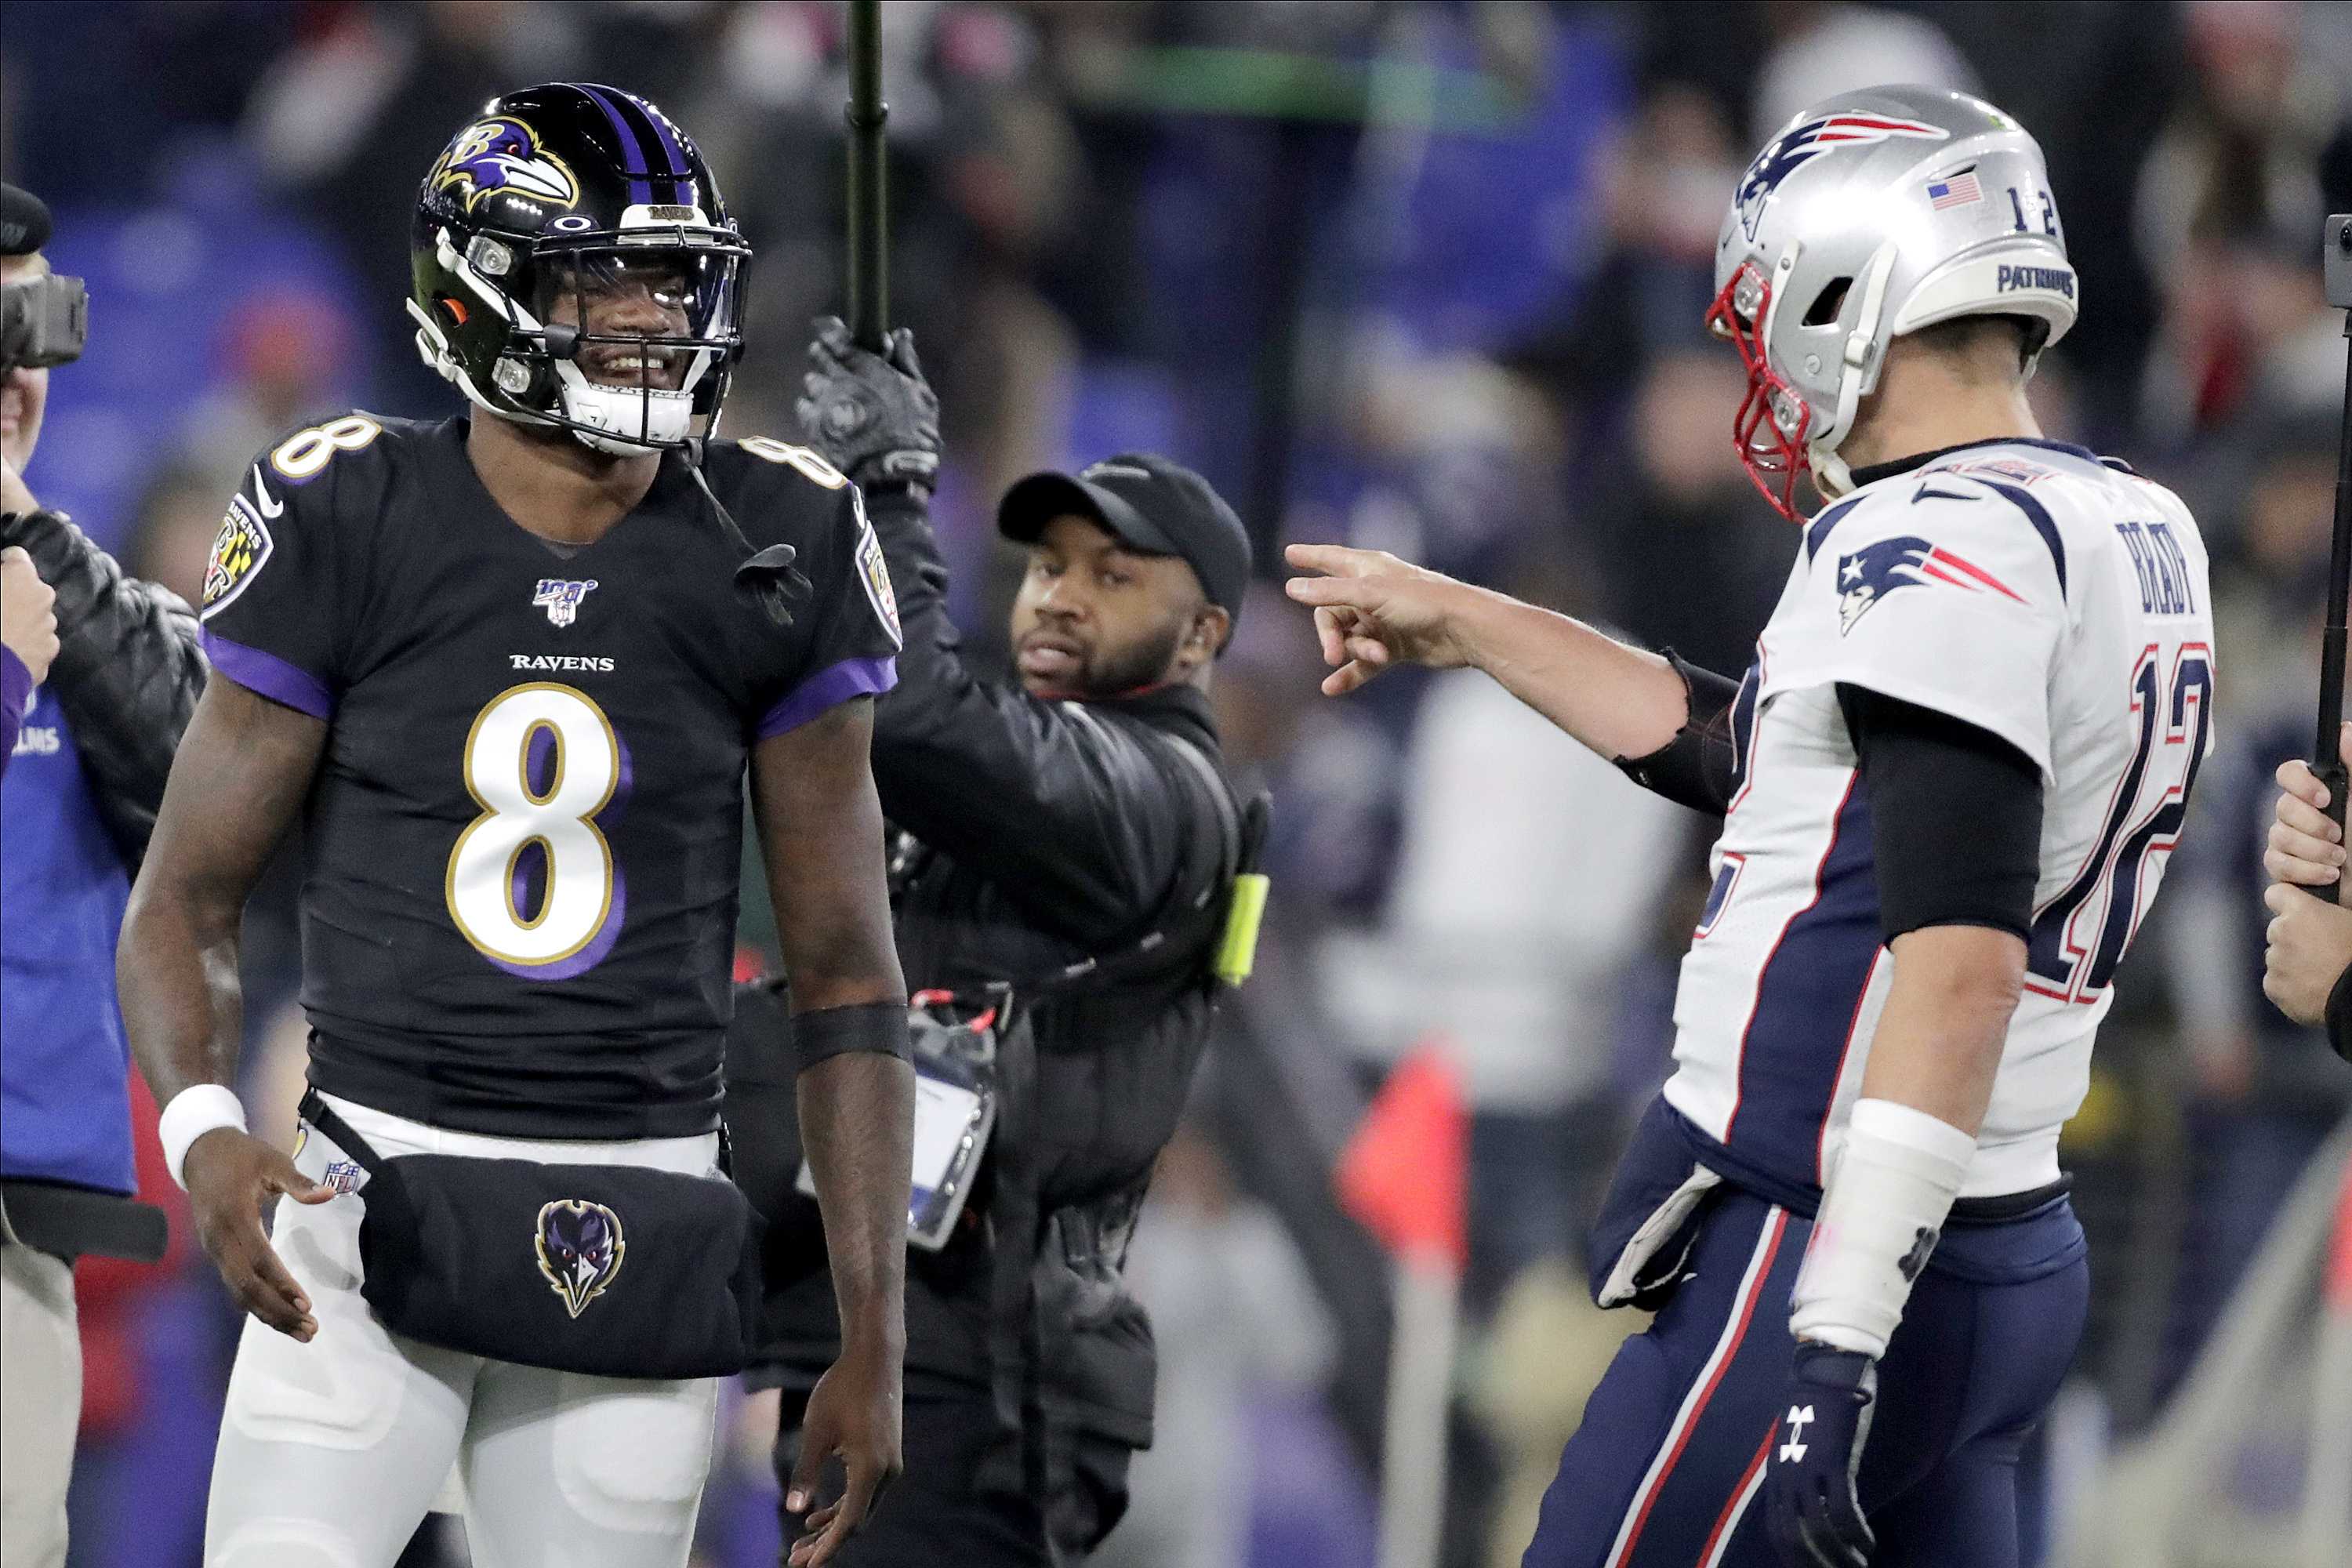 Patriots handed first loss of season by Ravens